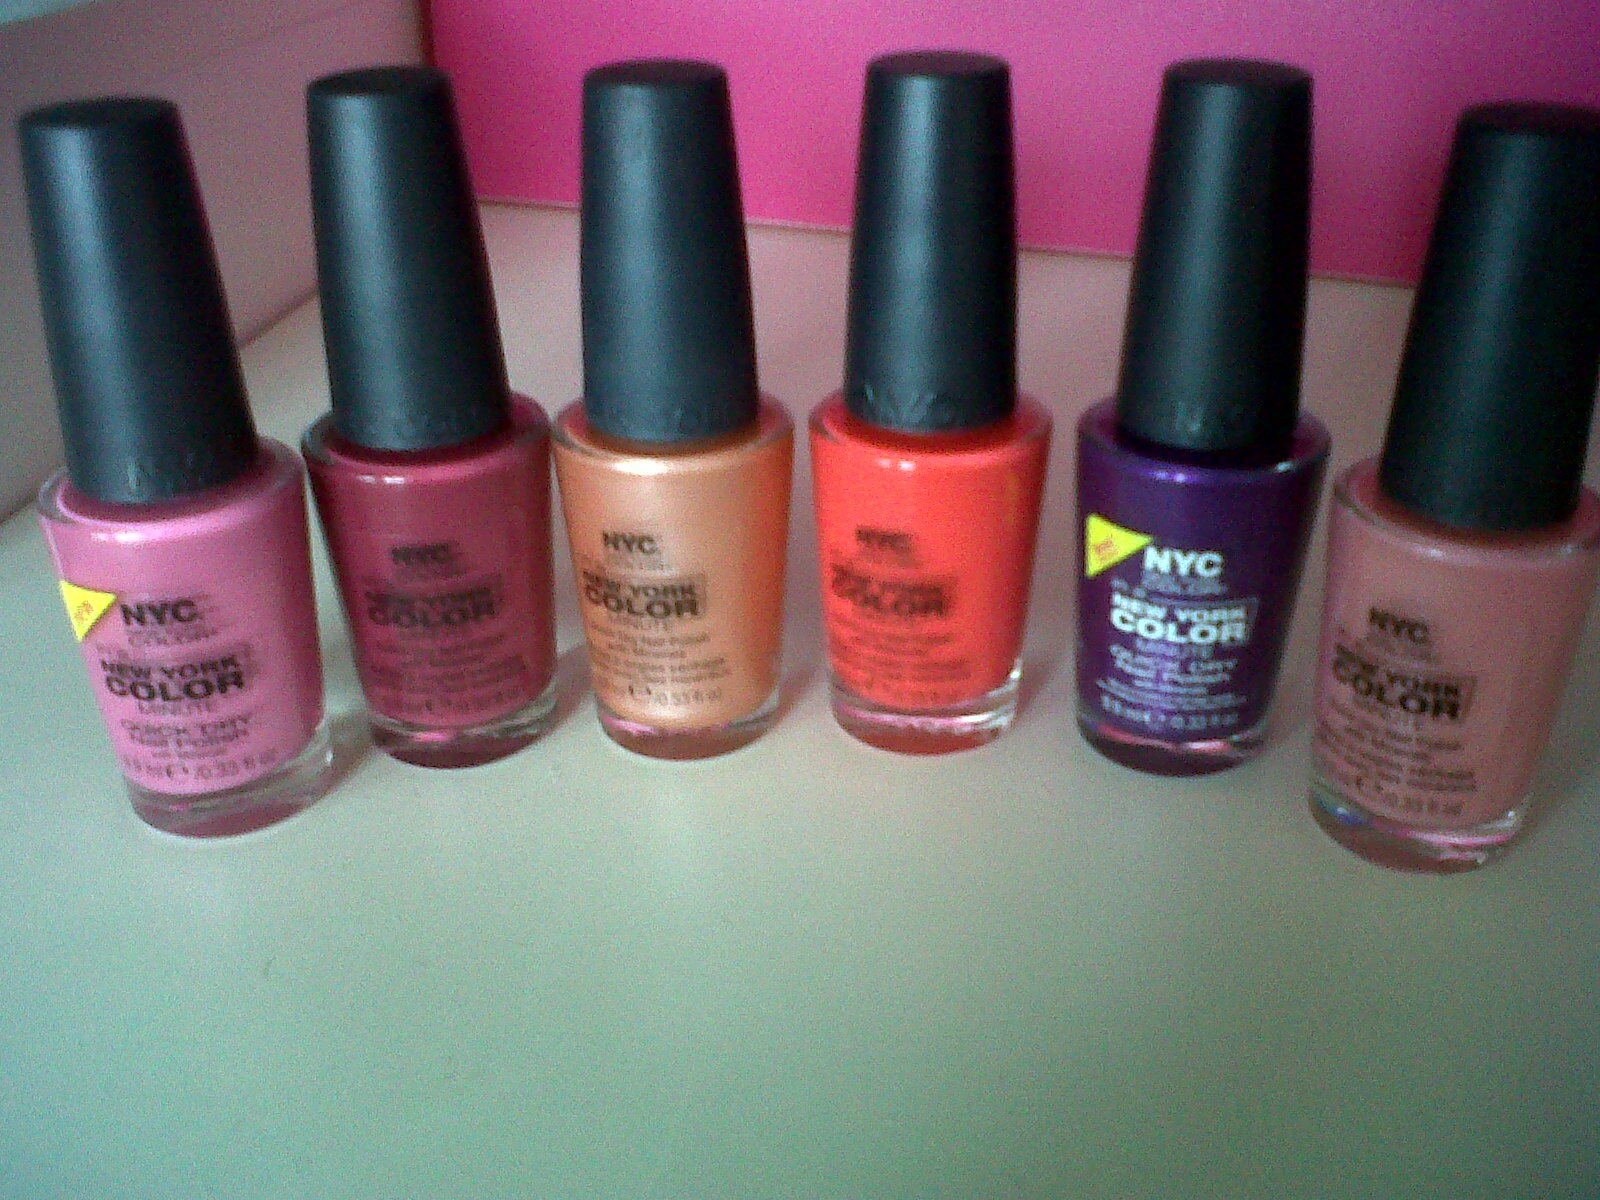 These nail polishes are a must have! They come in a great range of colours